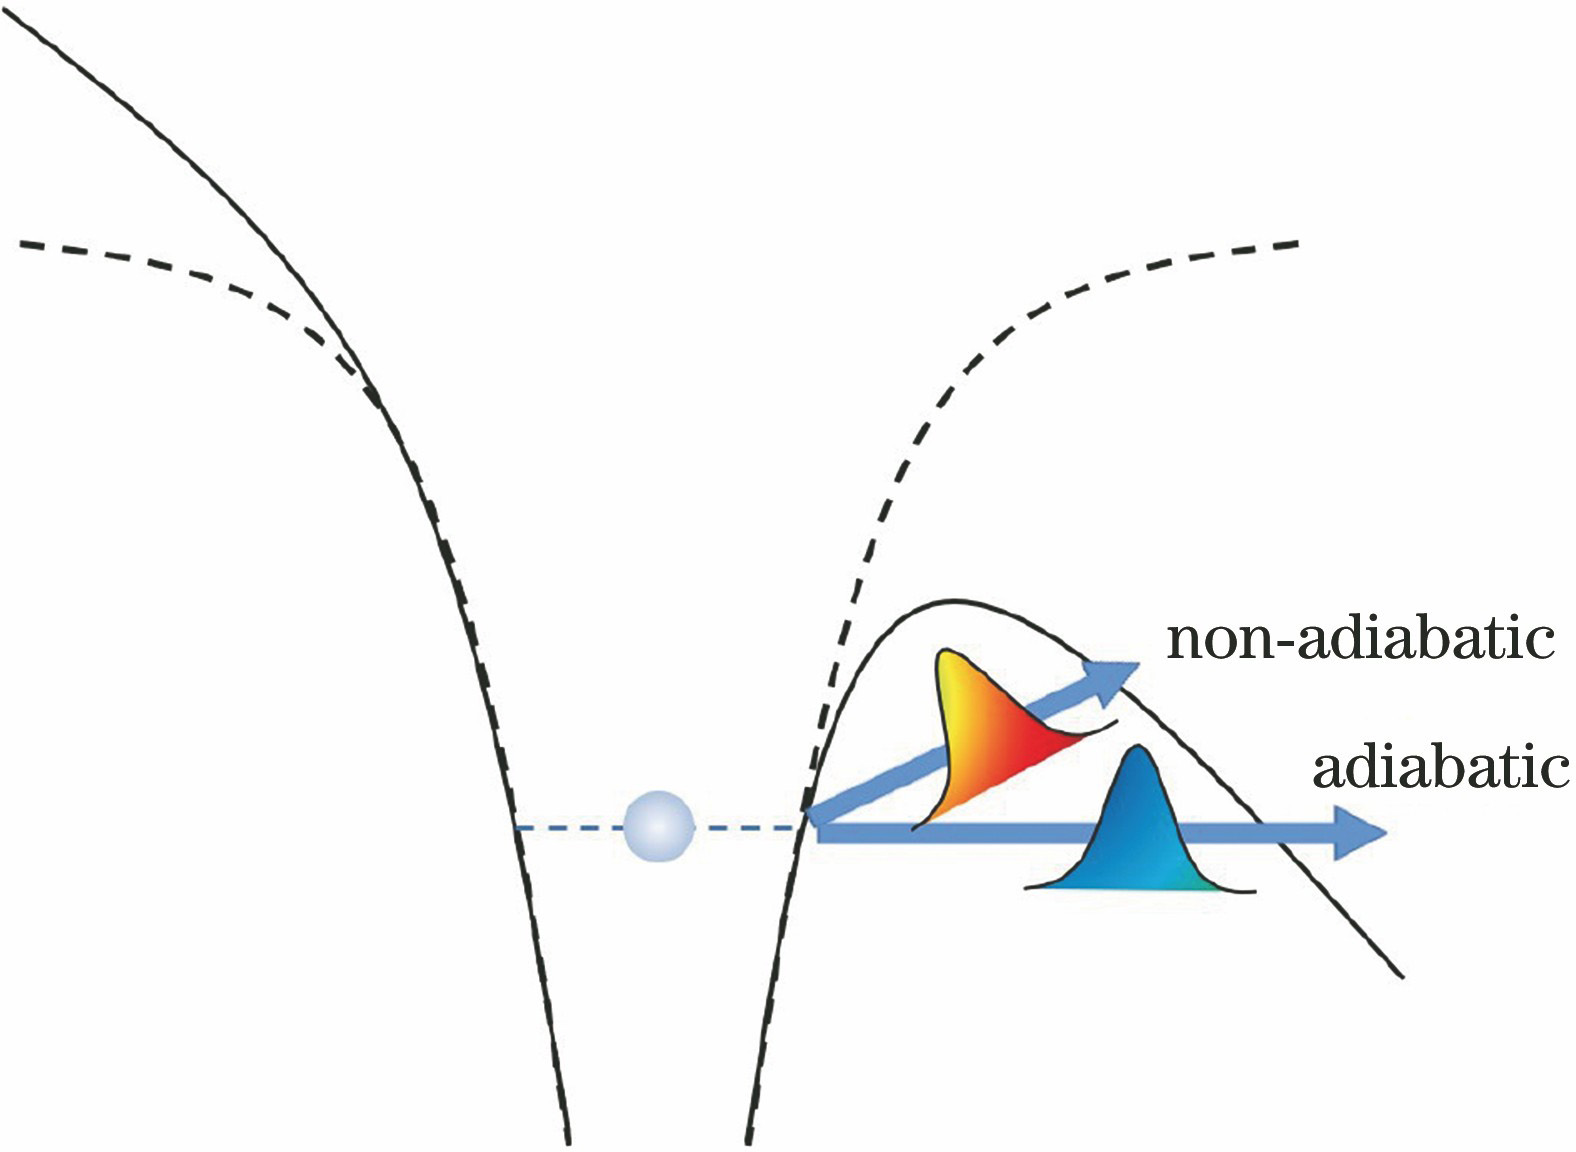 Physical picture of tunneling ionization. Horizontal channel represents adiabatic tunneling, and upwards tilted channel represents non-adiabatic tunneling